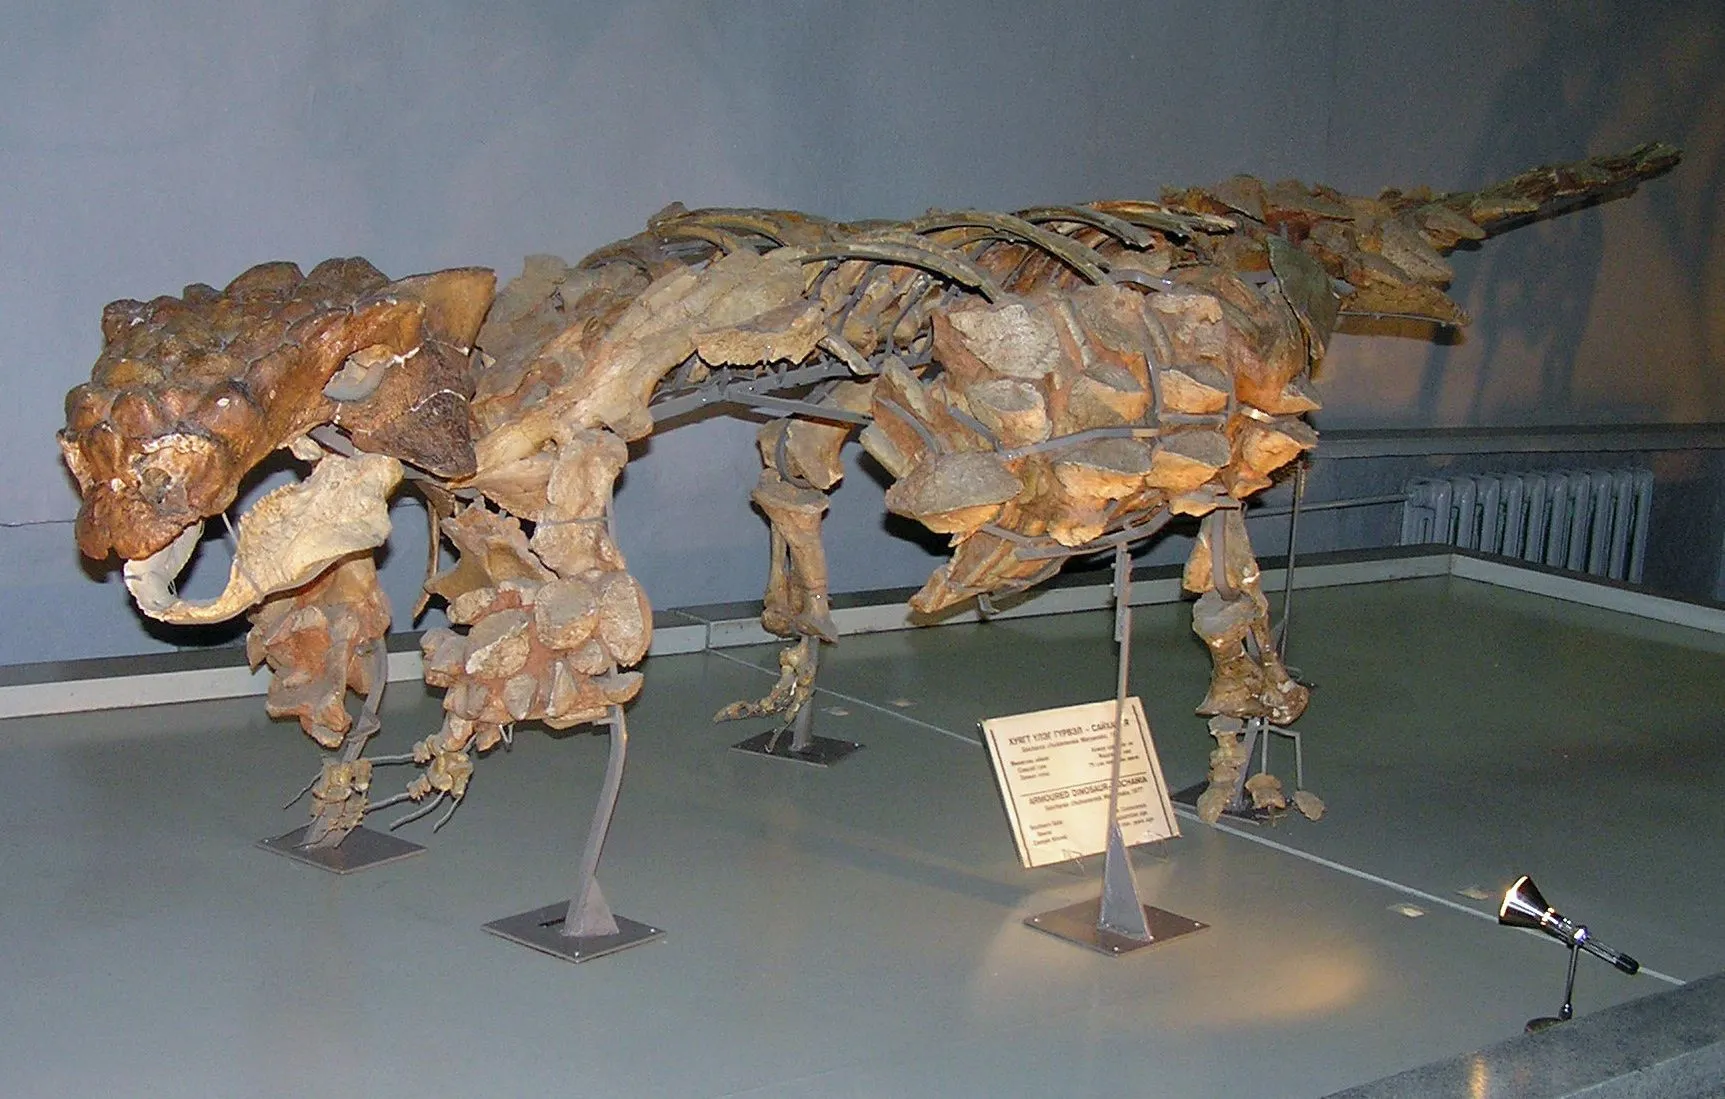 Facts and information about Pinacosaurus are amusing!